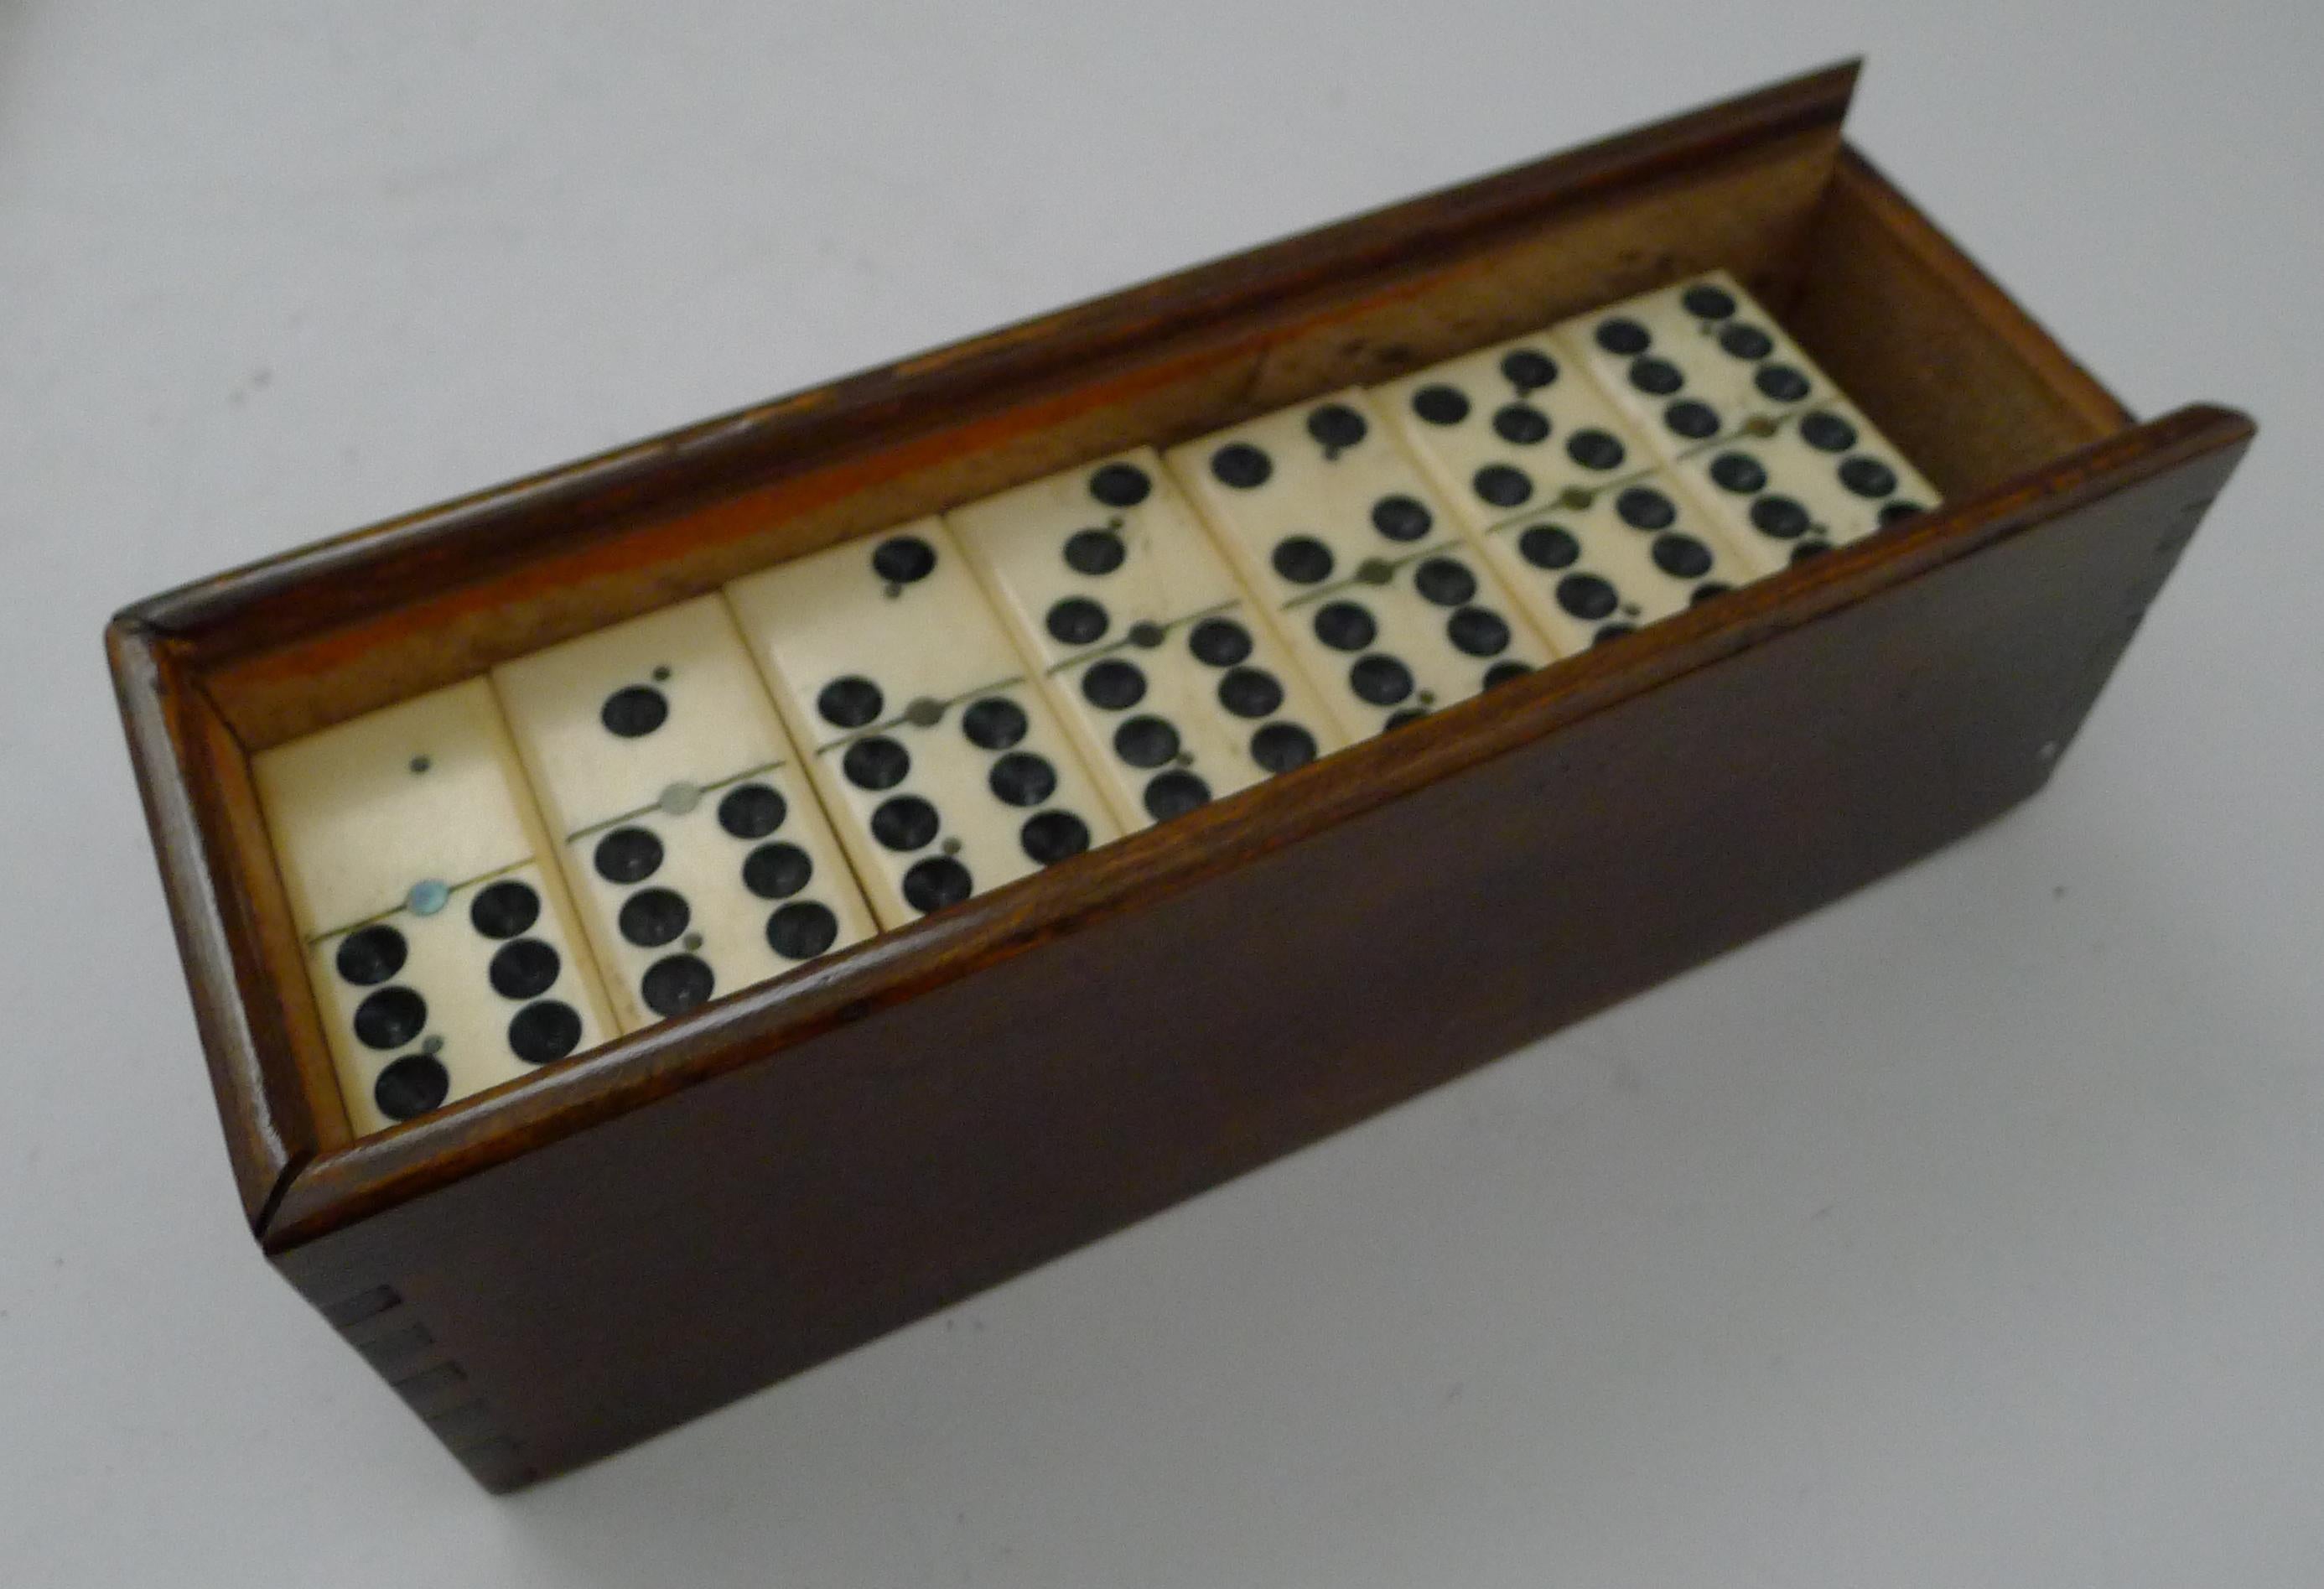 A charming set of late Victorian dominoes or dominos, complete with a handsome polished wooden storage box with a sliding lid.

Dating to around 1900, the set is better than many, with a quality finish, each Domino with rounded edges, the bone and